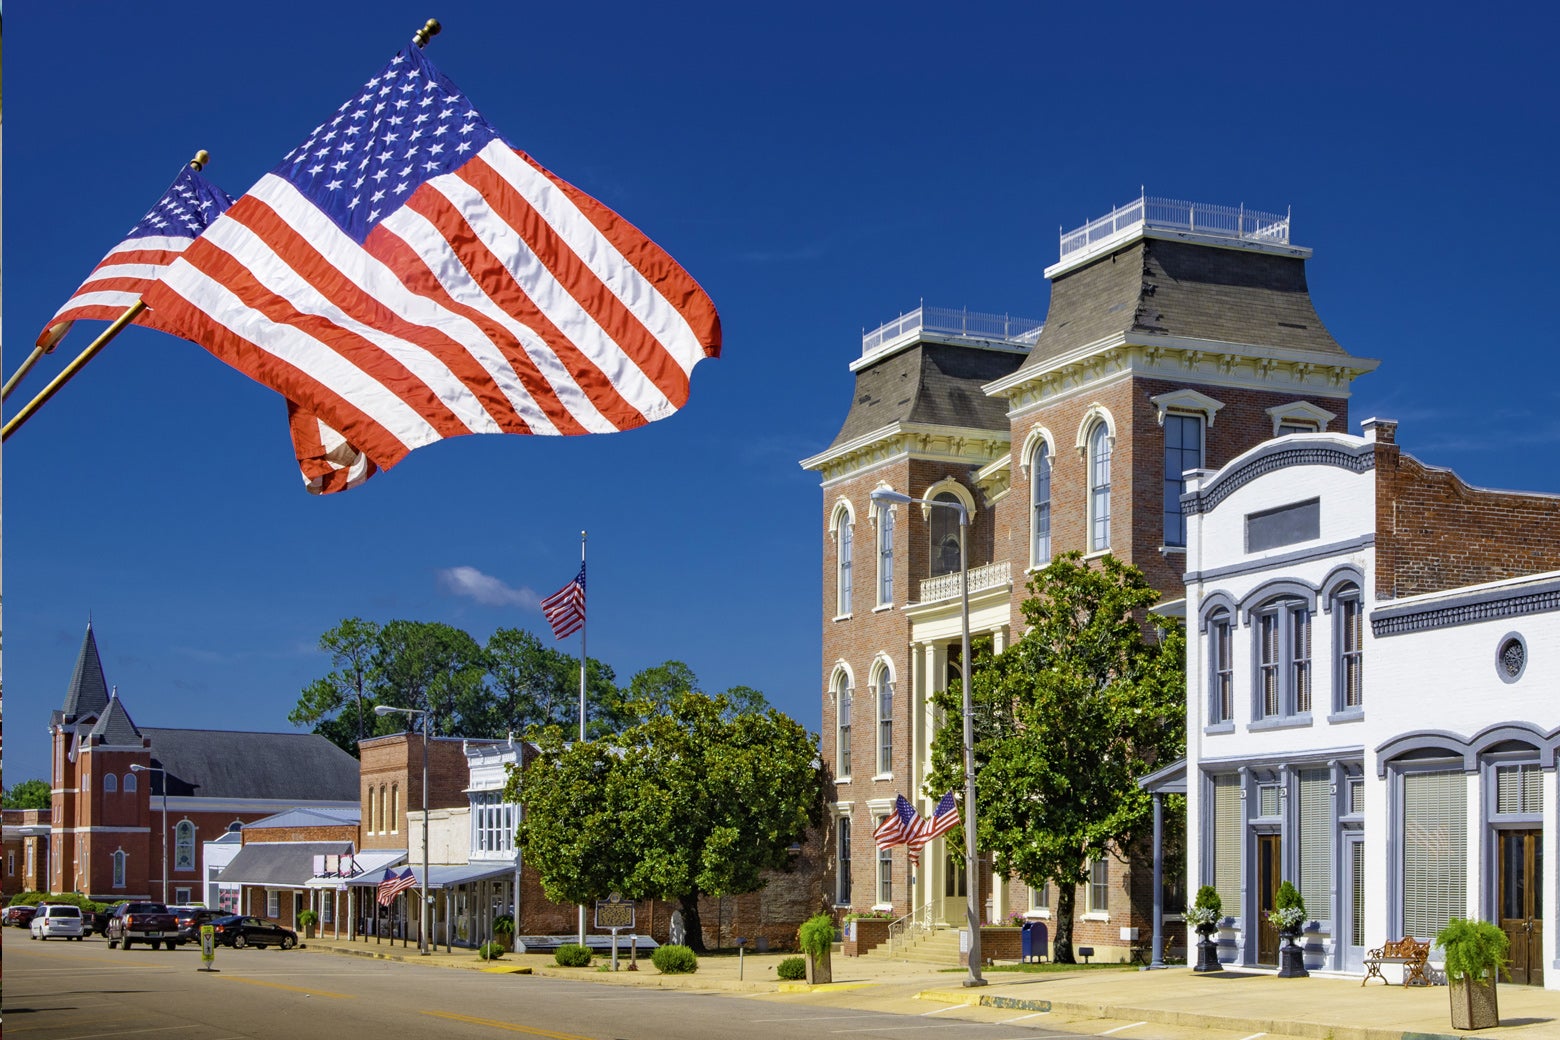 A typical small-town Main Street with an American flag flying front and center. 